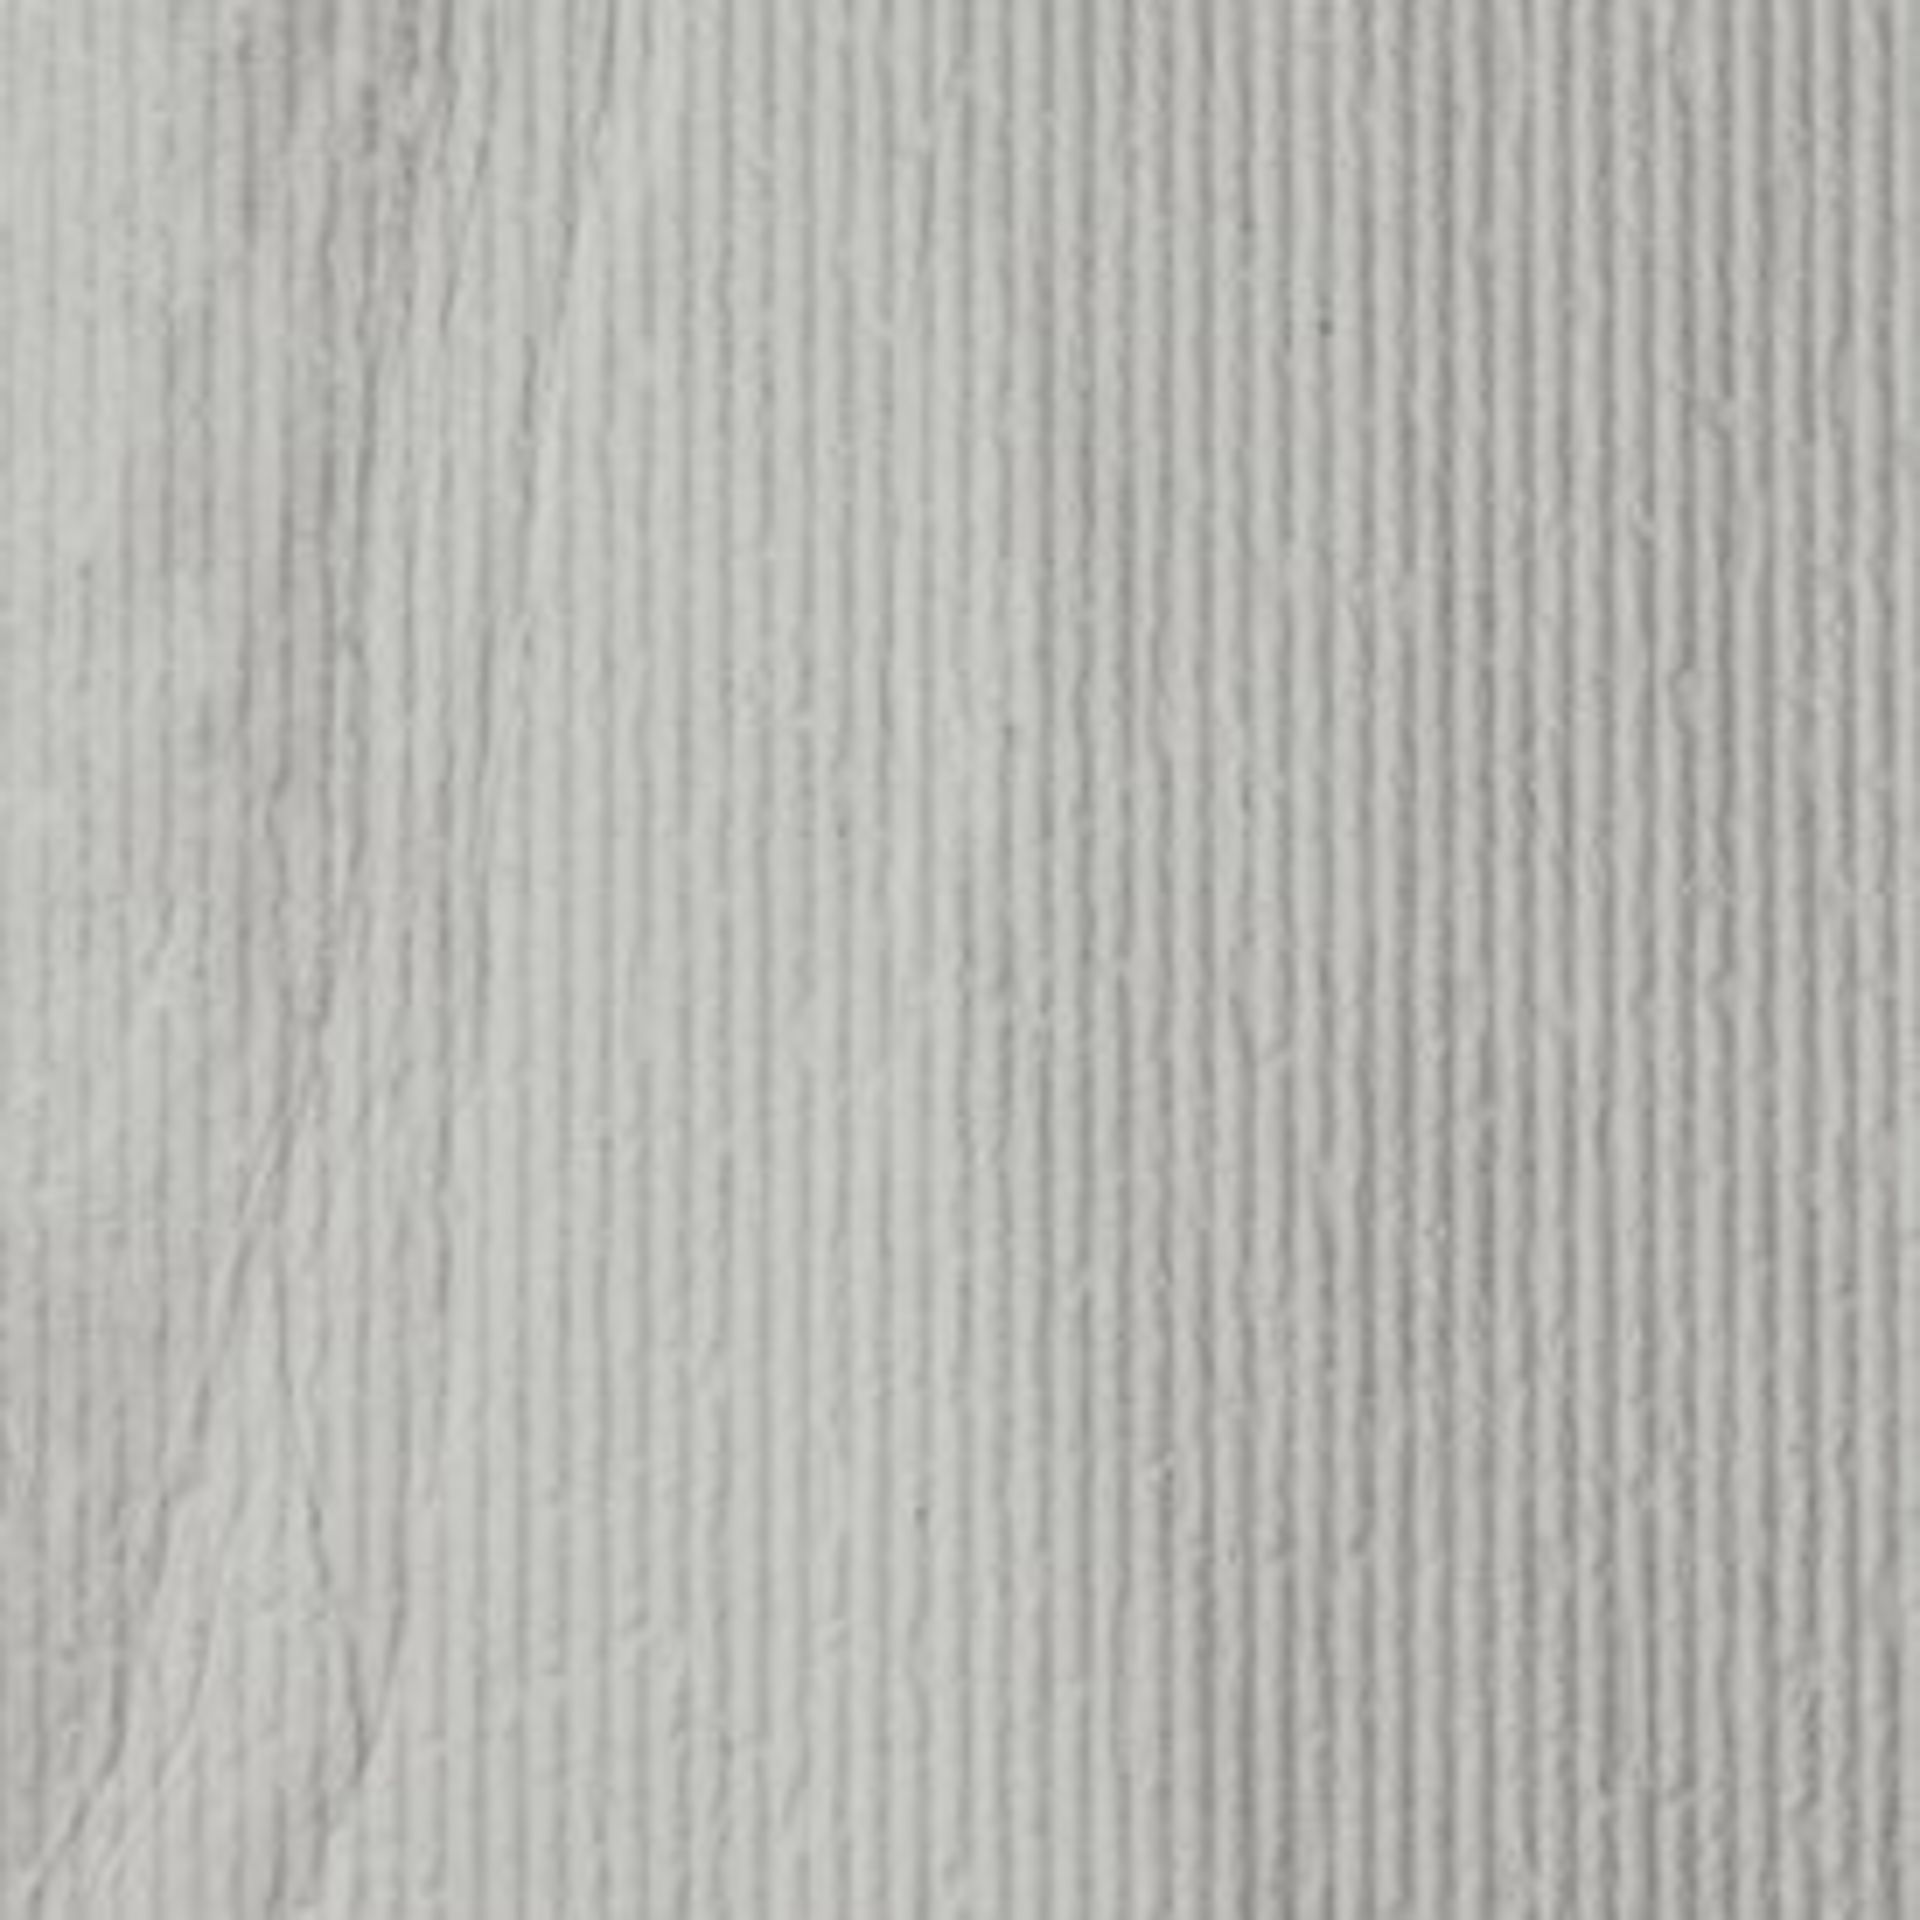 10x packs of 5 Johnsons 600x300mm Haven Slate decor textured wall and floor tiles , new, ref code